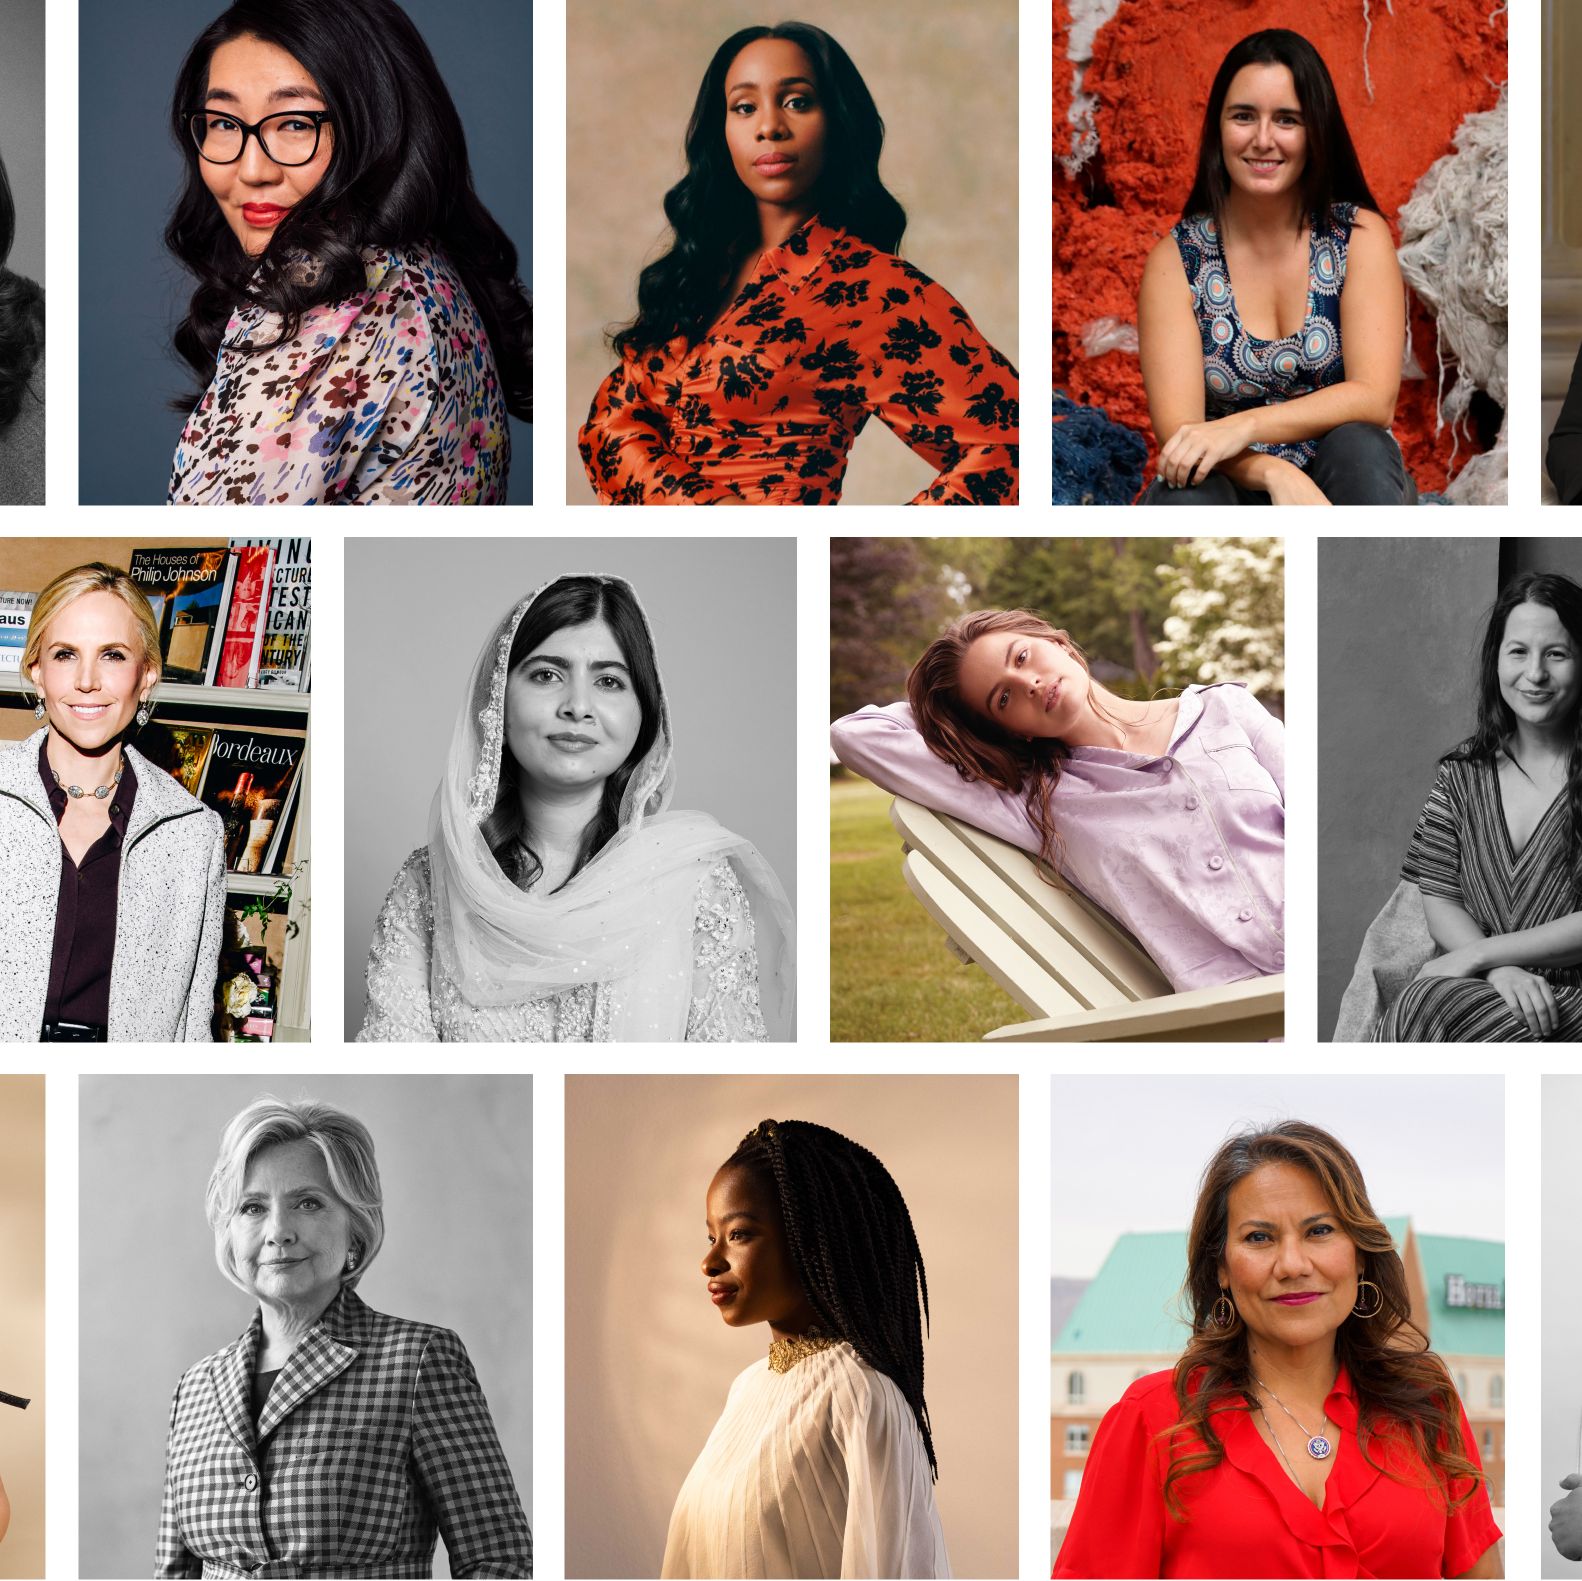 Our 2024 Women of Impact honorees are freedom fighters and rule breakers. These activists, leaders, and visionaries are pushing their fields to new heights, charting their own paths, shaping trends, and saying, “you thought that was my pinnacle? Think again, I’m only getting started.”

<br><br>Vice President Kamala Harris is making history as the first member of the executive branch to speak boldly about abortion rights. Glossier founder Emily Weiss continues to reinvent her groundbreaking beauty company that she hopes will be a 100-year brand. Tory Burch is empowering women entrepreneurs. Amanda Gorman uses her words to create social change, while Hillary Clinton, Malala, and Shaina Taub are bringing the story of women’s suffrage to Broadway. Senator Tammy Duckworth is helping to ensure people with disabilities are seen and heard, while Congresswoman Veronica Escobar speaks for border communities. Rosario Hevia is working to make the fashion business more sustainable while Cameron Russell works to make it more equitable. CNN’s Abby Phillip is bringing empathy to cable news; Quinta Brunson uses her art to champion public schools; and Jenny Han’s stories make space for herself and others.

<br><br>The 14 women here prove there’s no one way to make a difference—you can start right where you are. Below, they share their goals, their mantras, how they define success, and what they hope their lasting marks on the world will be.